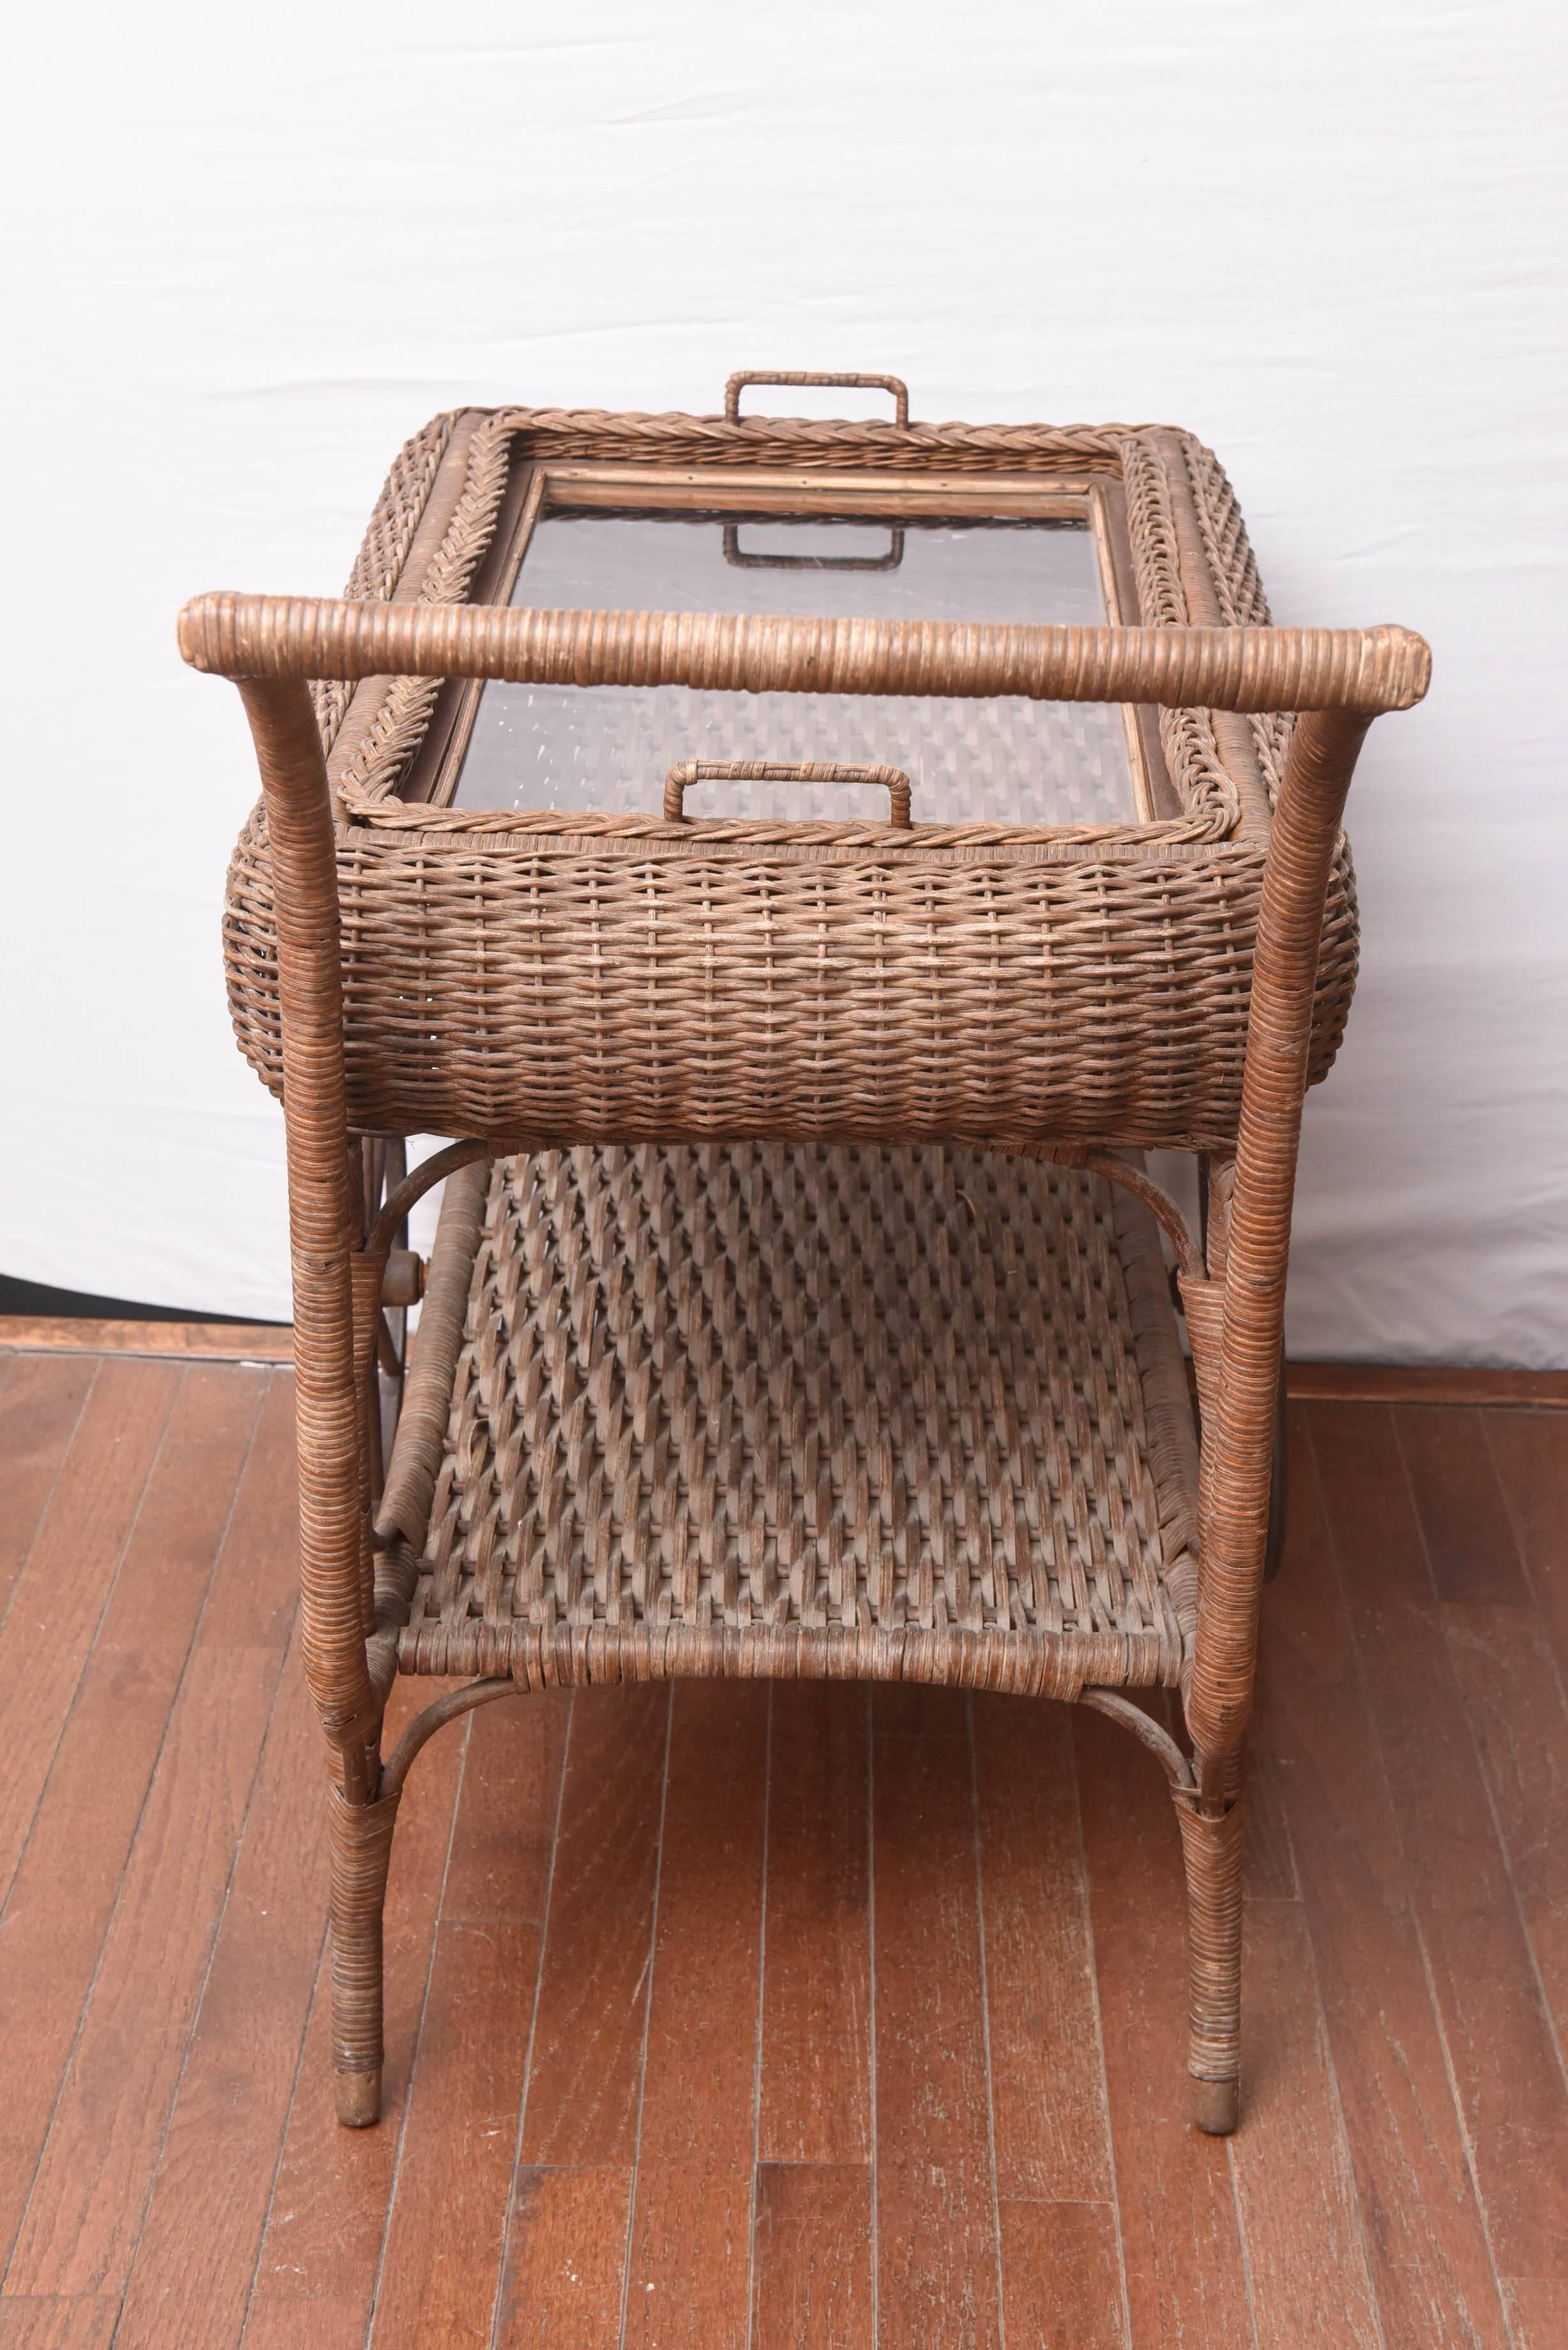 American Antique All Original Wicker Bar Cart, with Removable Tray for Service